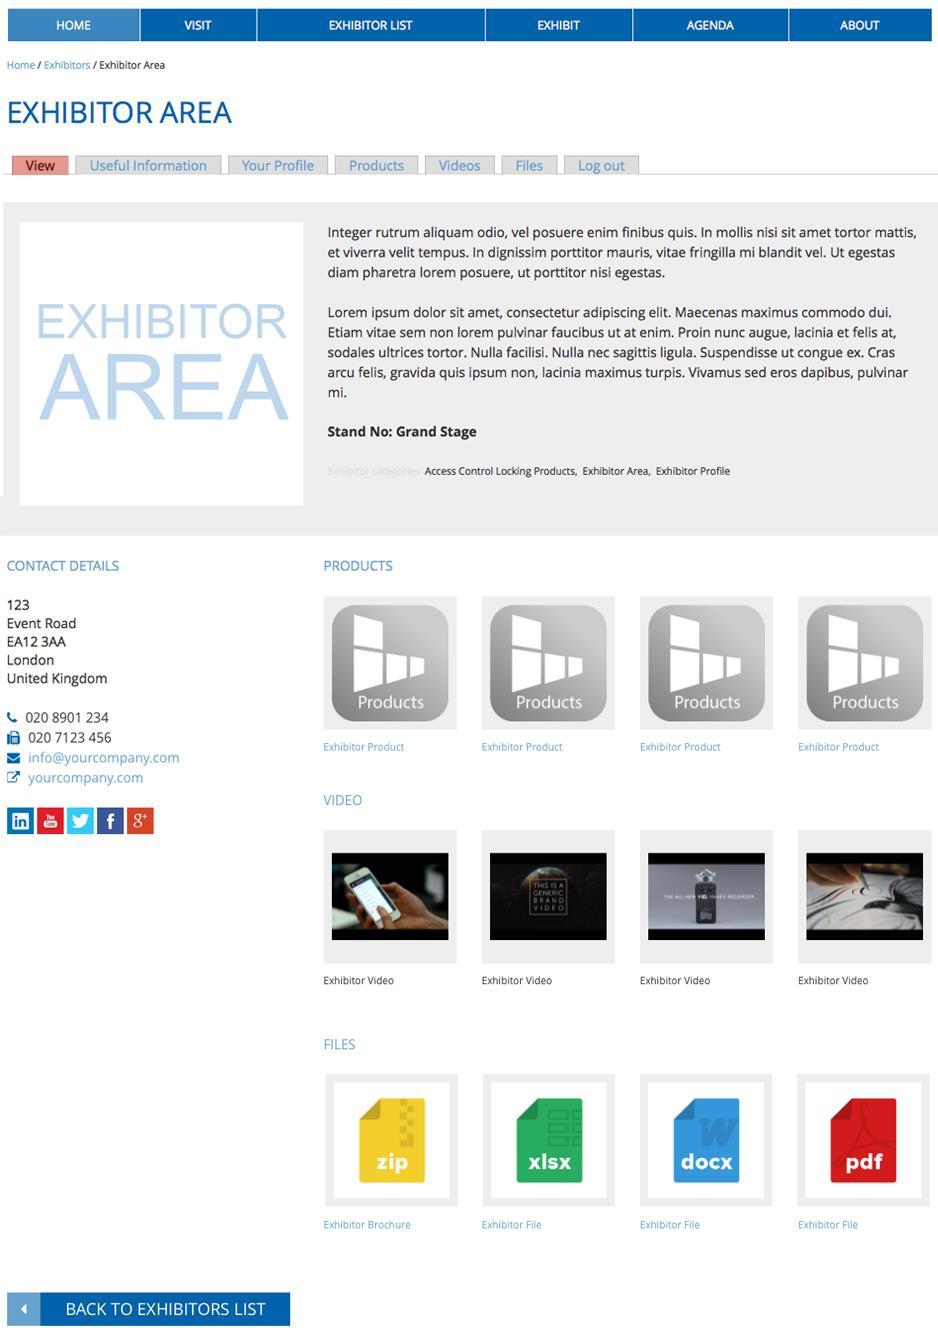 Viewing Your Profile Here you can view the amendments you have made to your Exhibitor Profile.